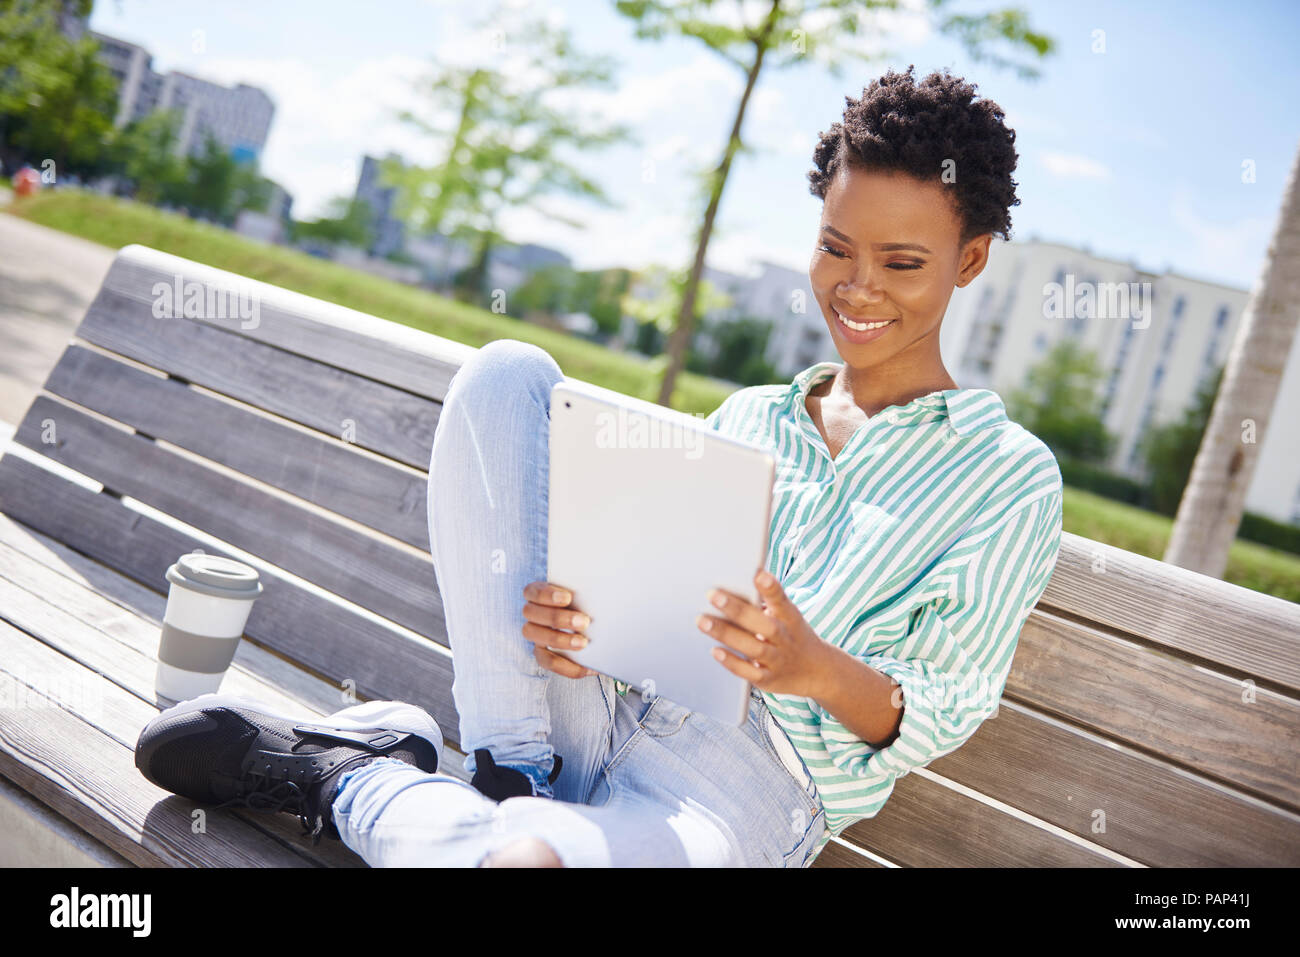 Portrait of smiling young woman with coffee to go sitting on bench looking at tablet Stock Photo